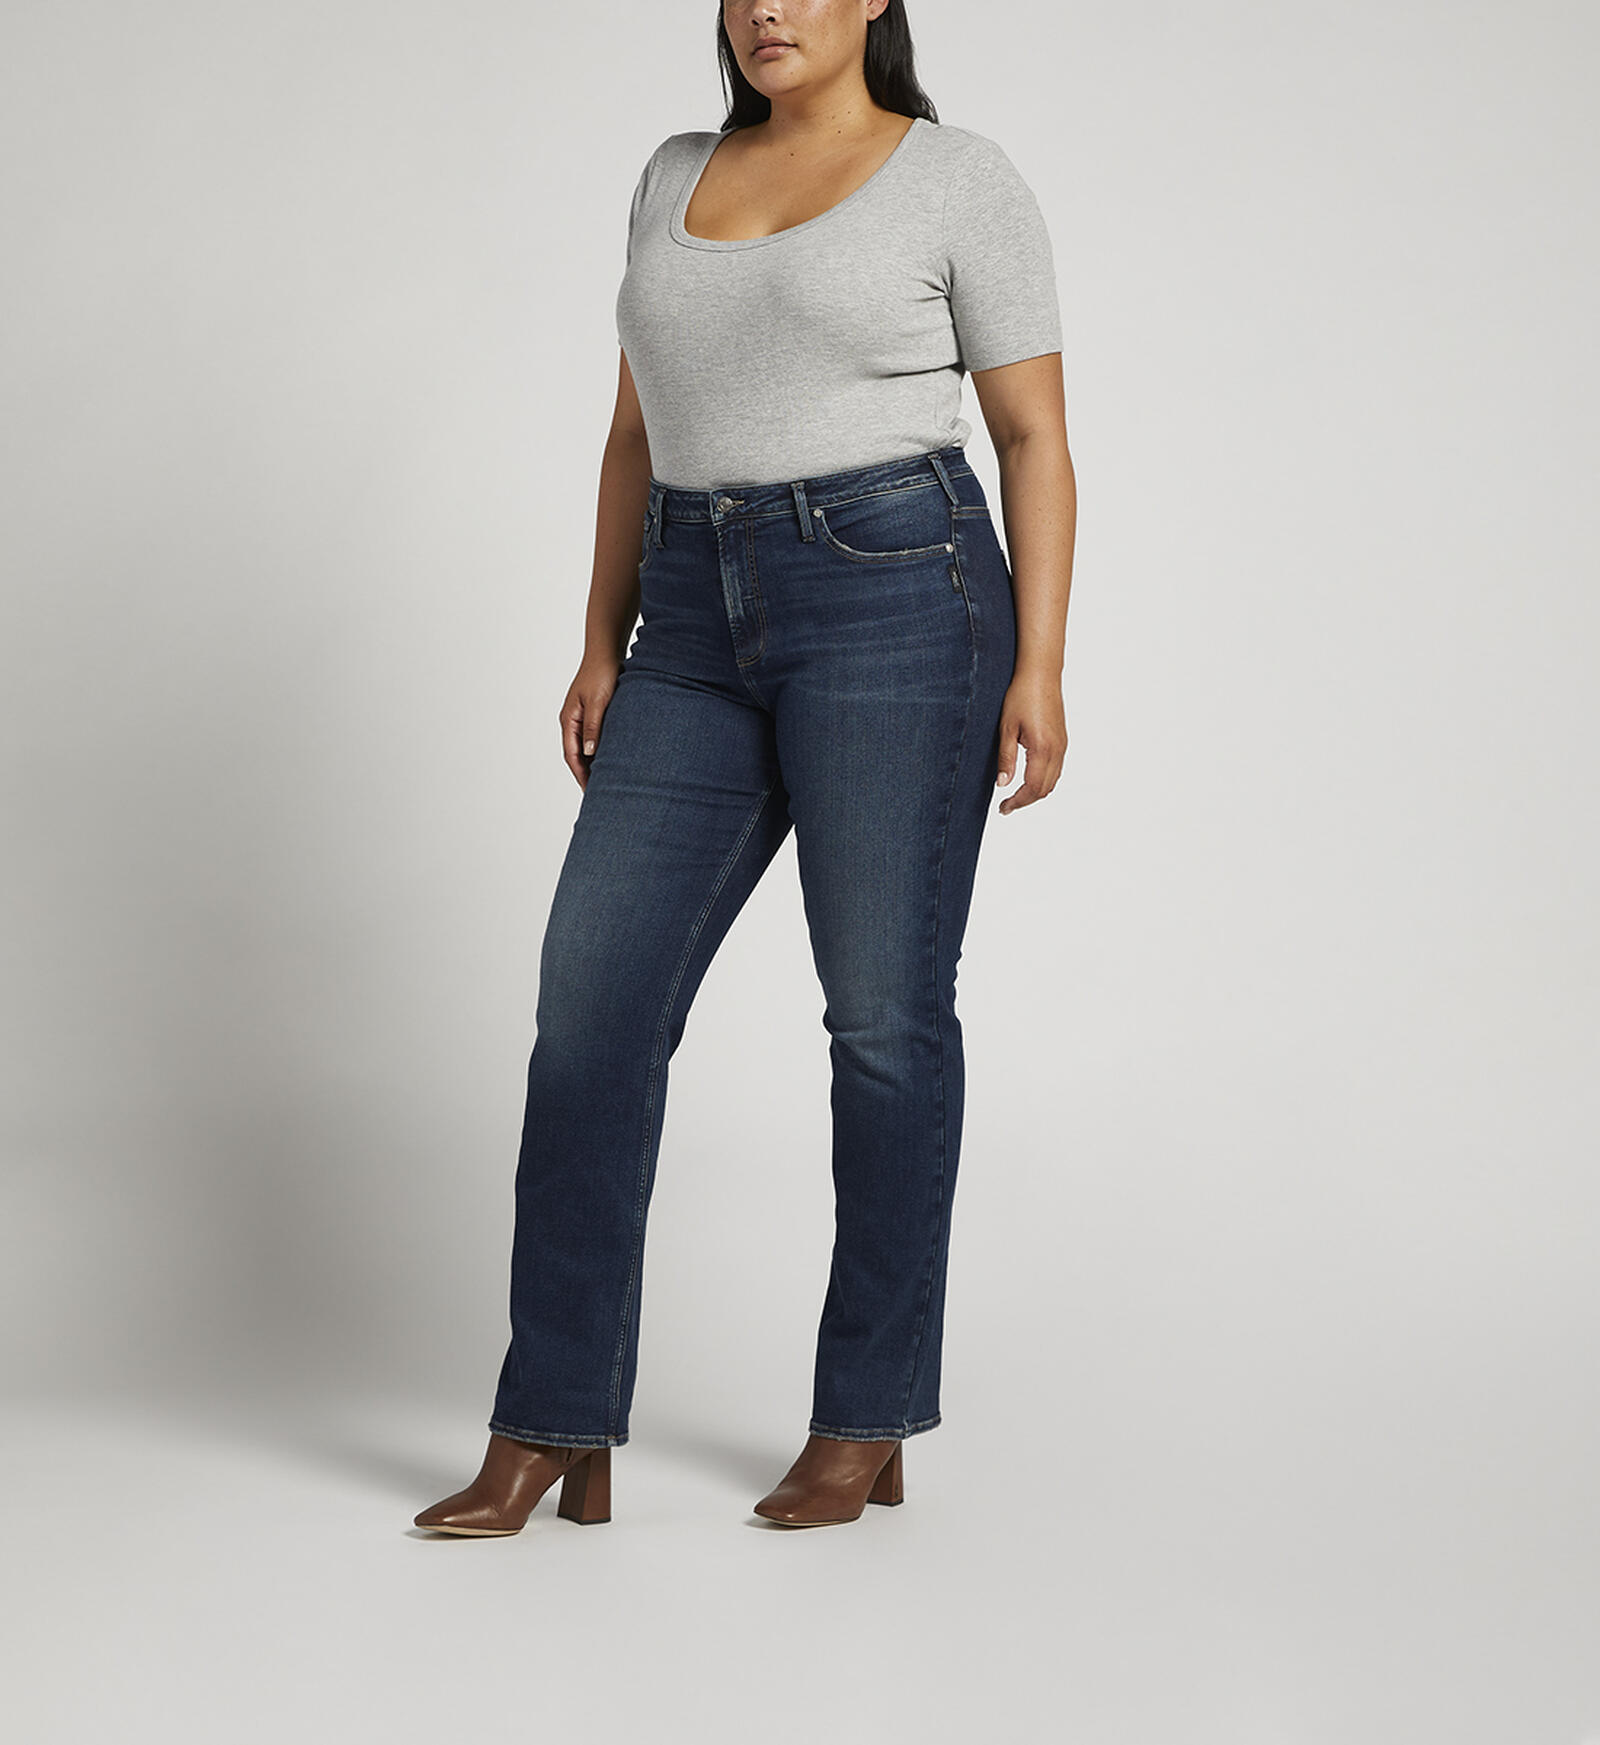 Buy Infinite Fit High Rise Bootcut Jeans Plus Size for USD 68.00